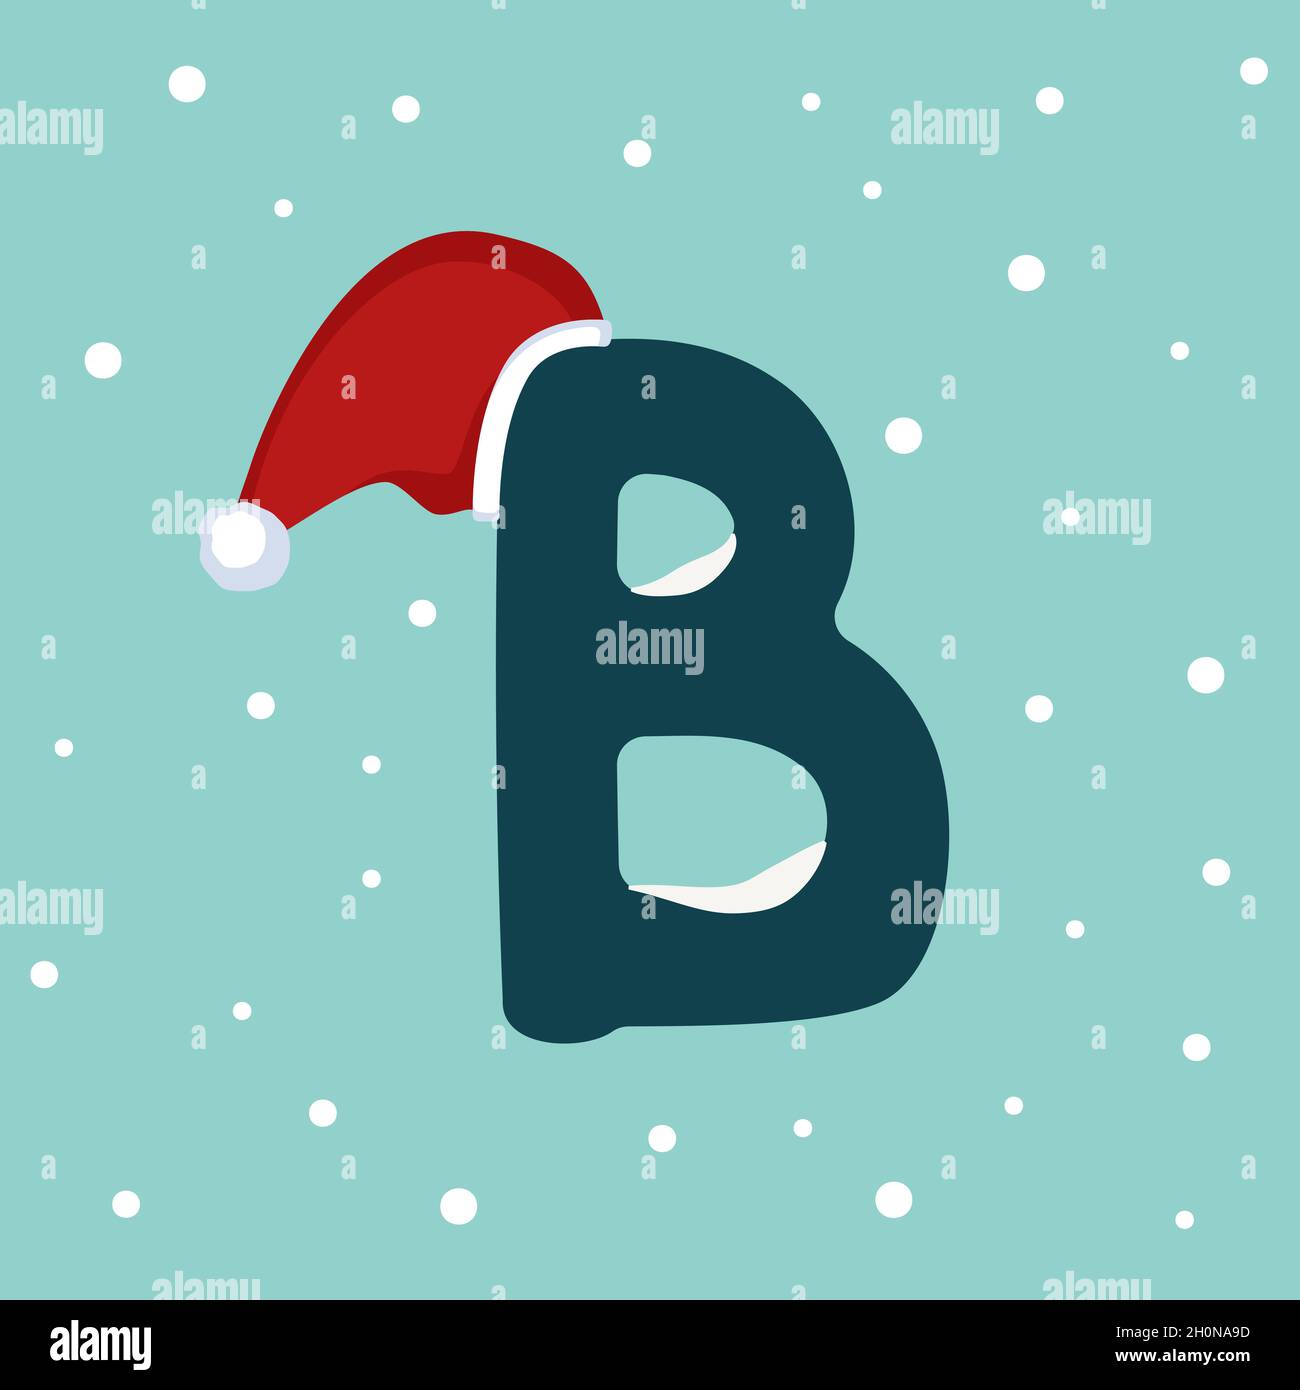 https://c8.alamy.com/comp/2H0NA9D/letter-b-with-snow-and-red-santa-claus-hat-festive-font-for-christmas-and-new-year-2H0NA9D.jpg